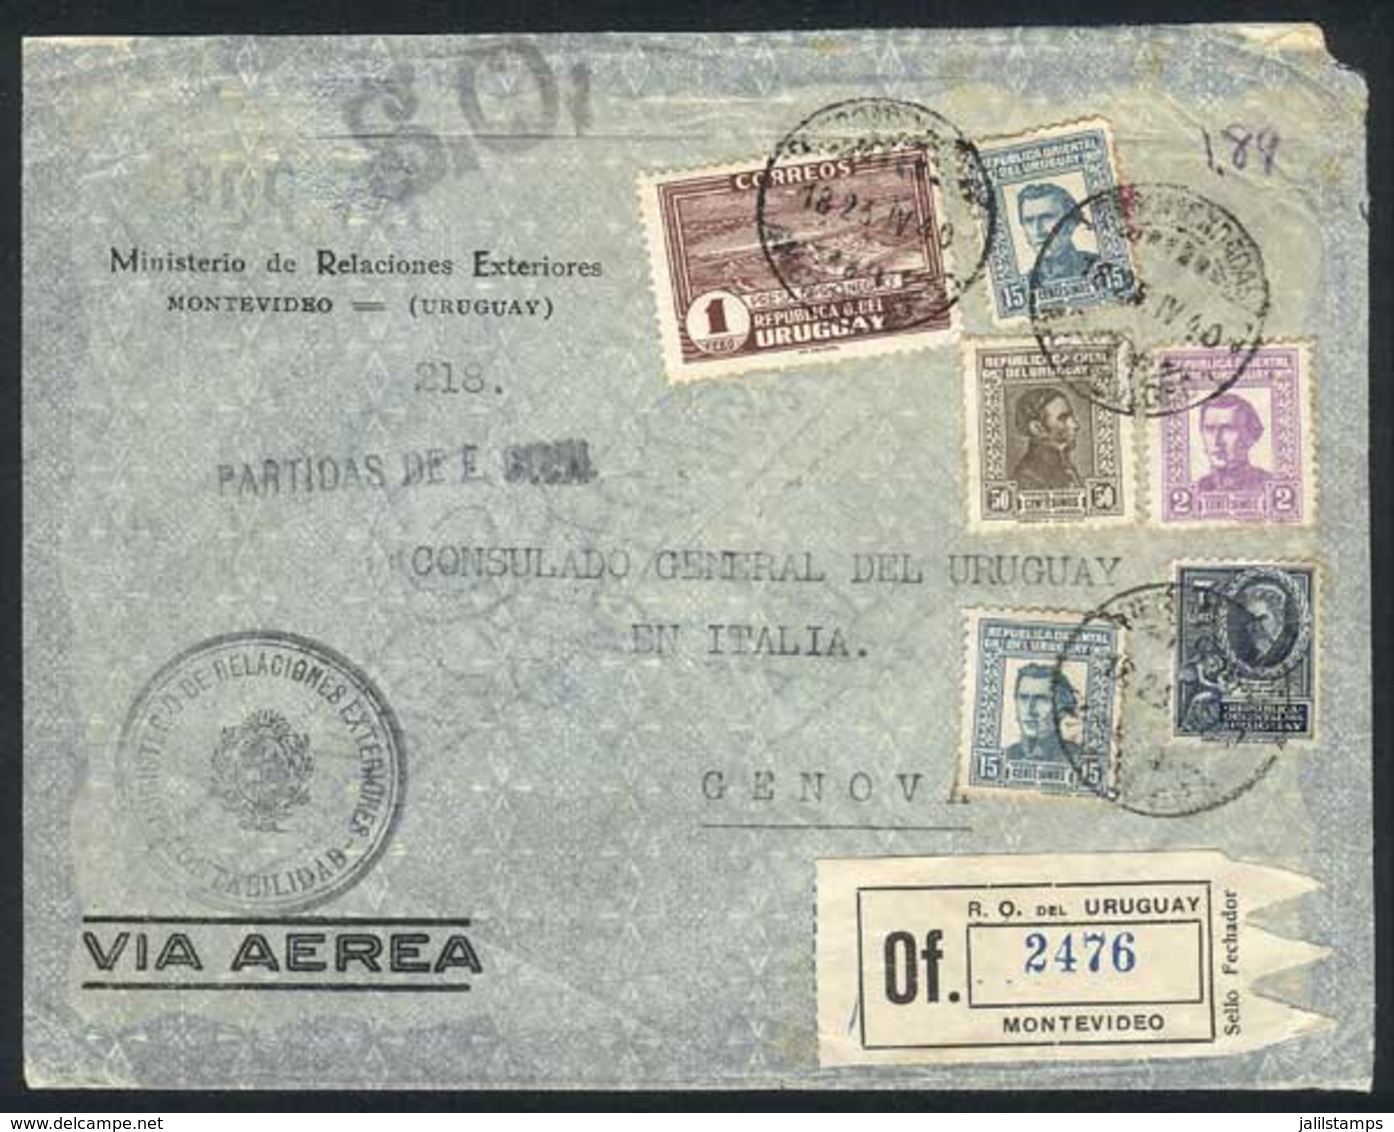 URUGUAY: Registered Air Mail Cover Of The Ministry Of Foreign Affairs Sent To Italy By Official Mail, Franked $1.89 In R - Uruguay